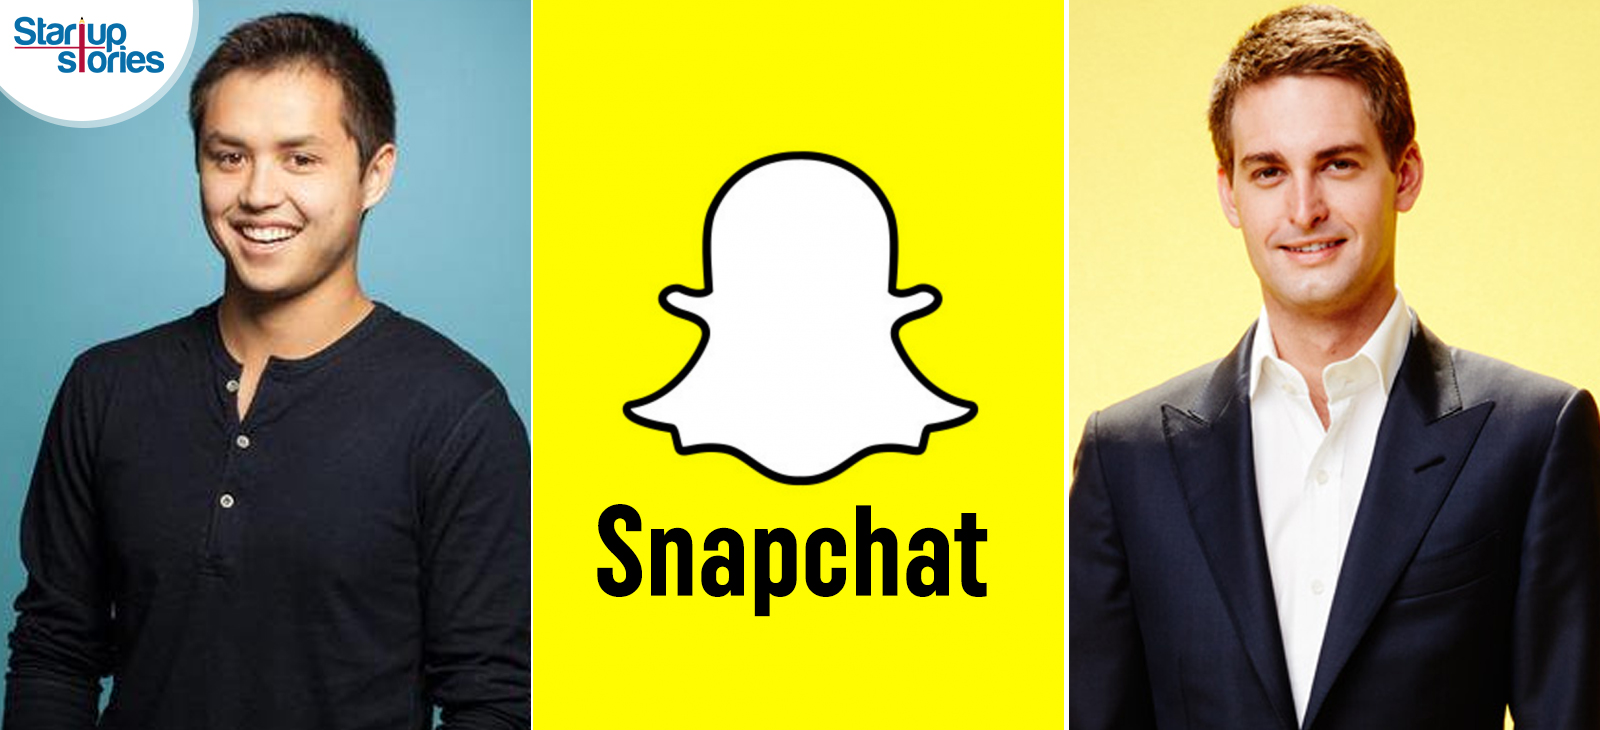 Snapchat Founding Story,Startup Stories,2018 Best Motivational Stories,Startup News India,Inspiring Startup Story,History of Snapchat,Founding Story of Messaging App Snapchat,Snapchat updates,Snapchat Success Story,Snapchat Founder,Most Successful Businesses in World Startups